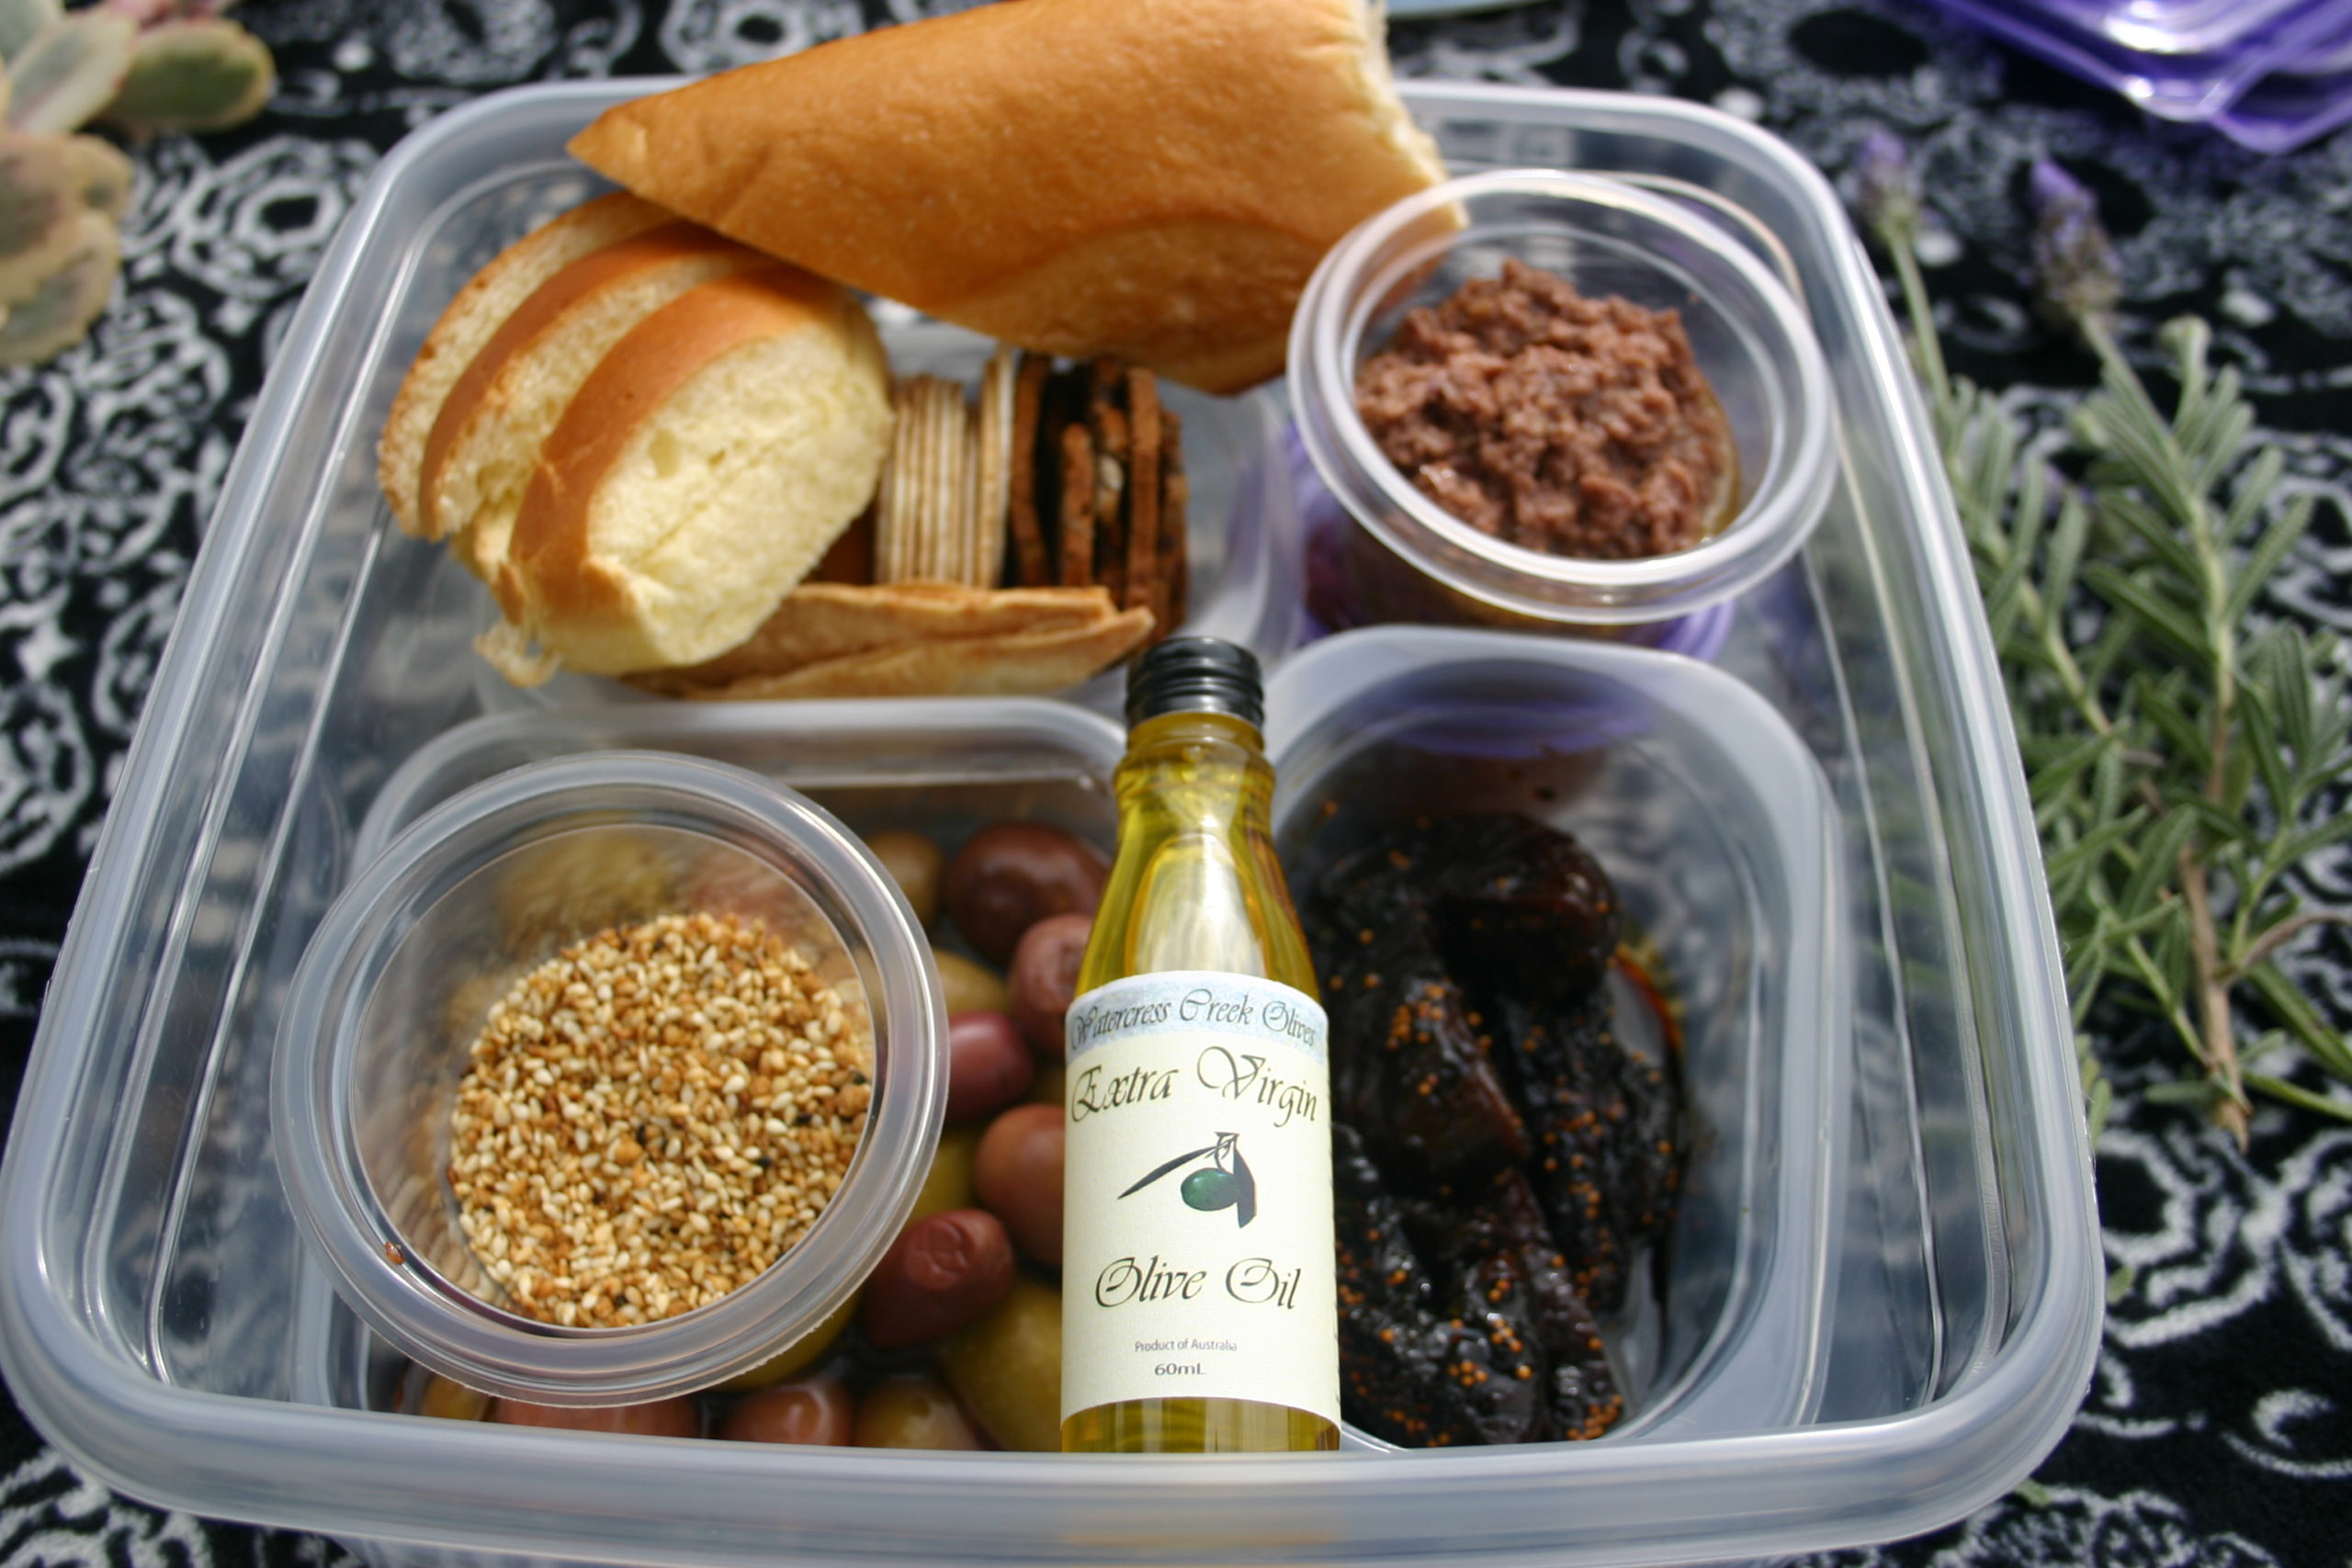 Watercress Creek Olives and Limes picnic pack